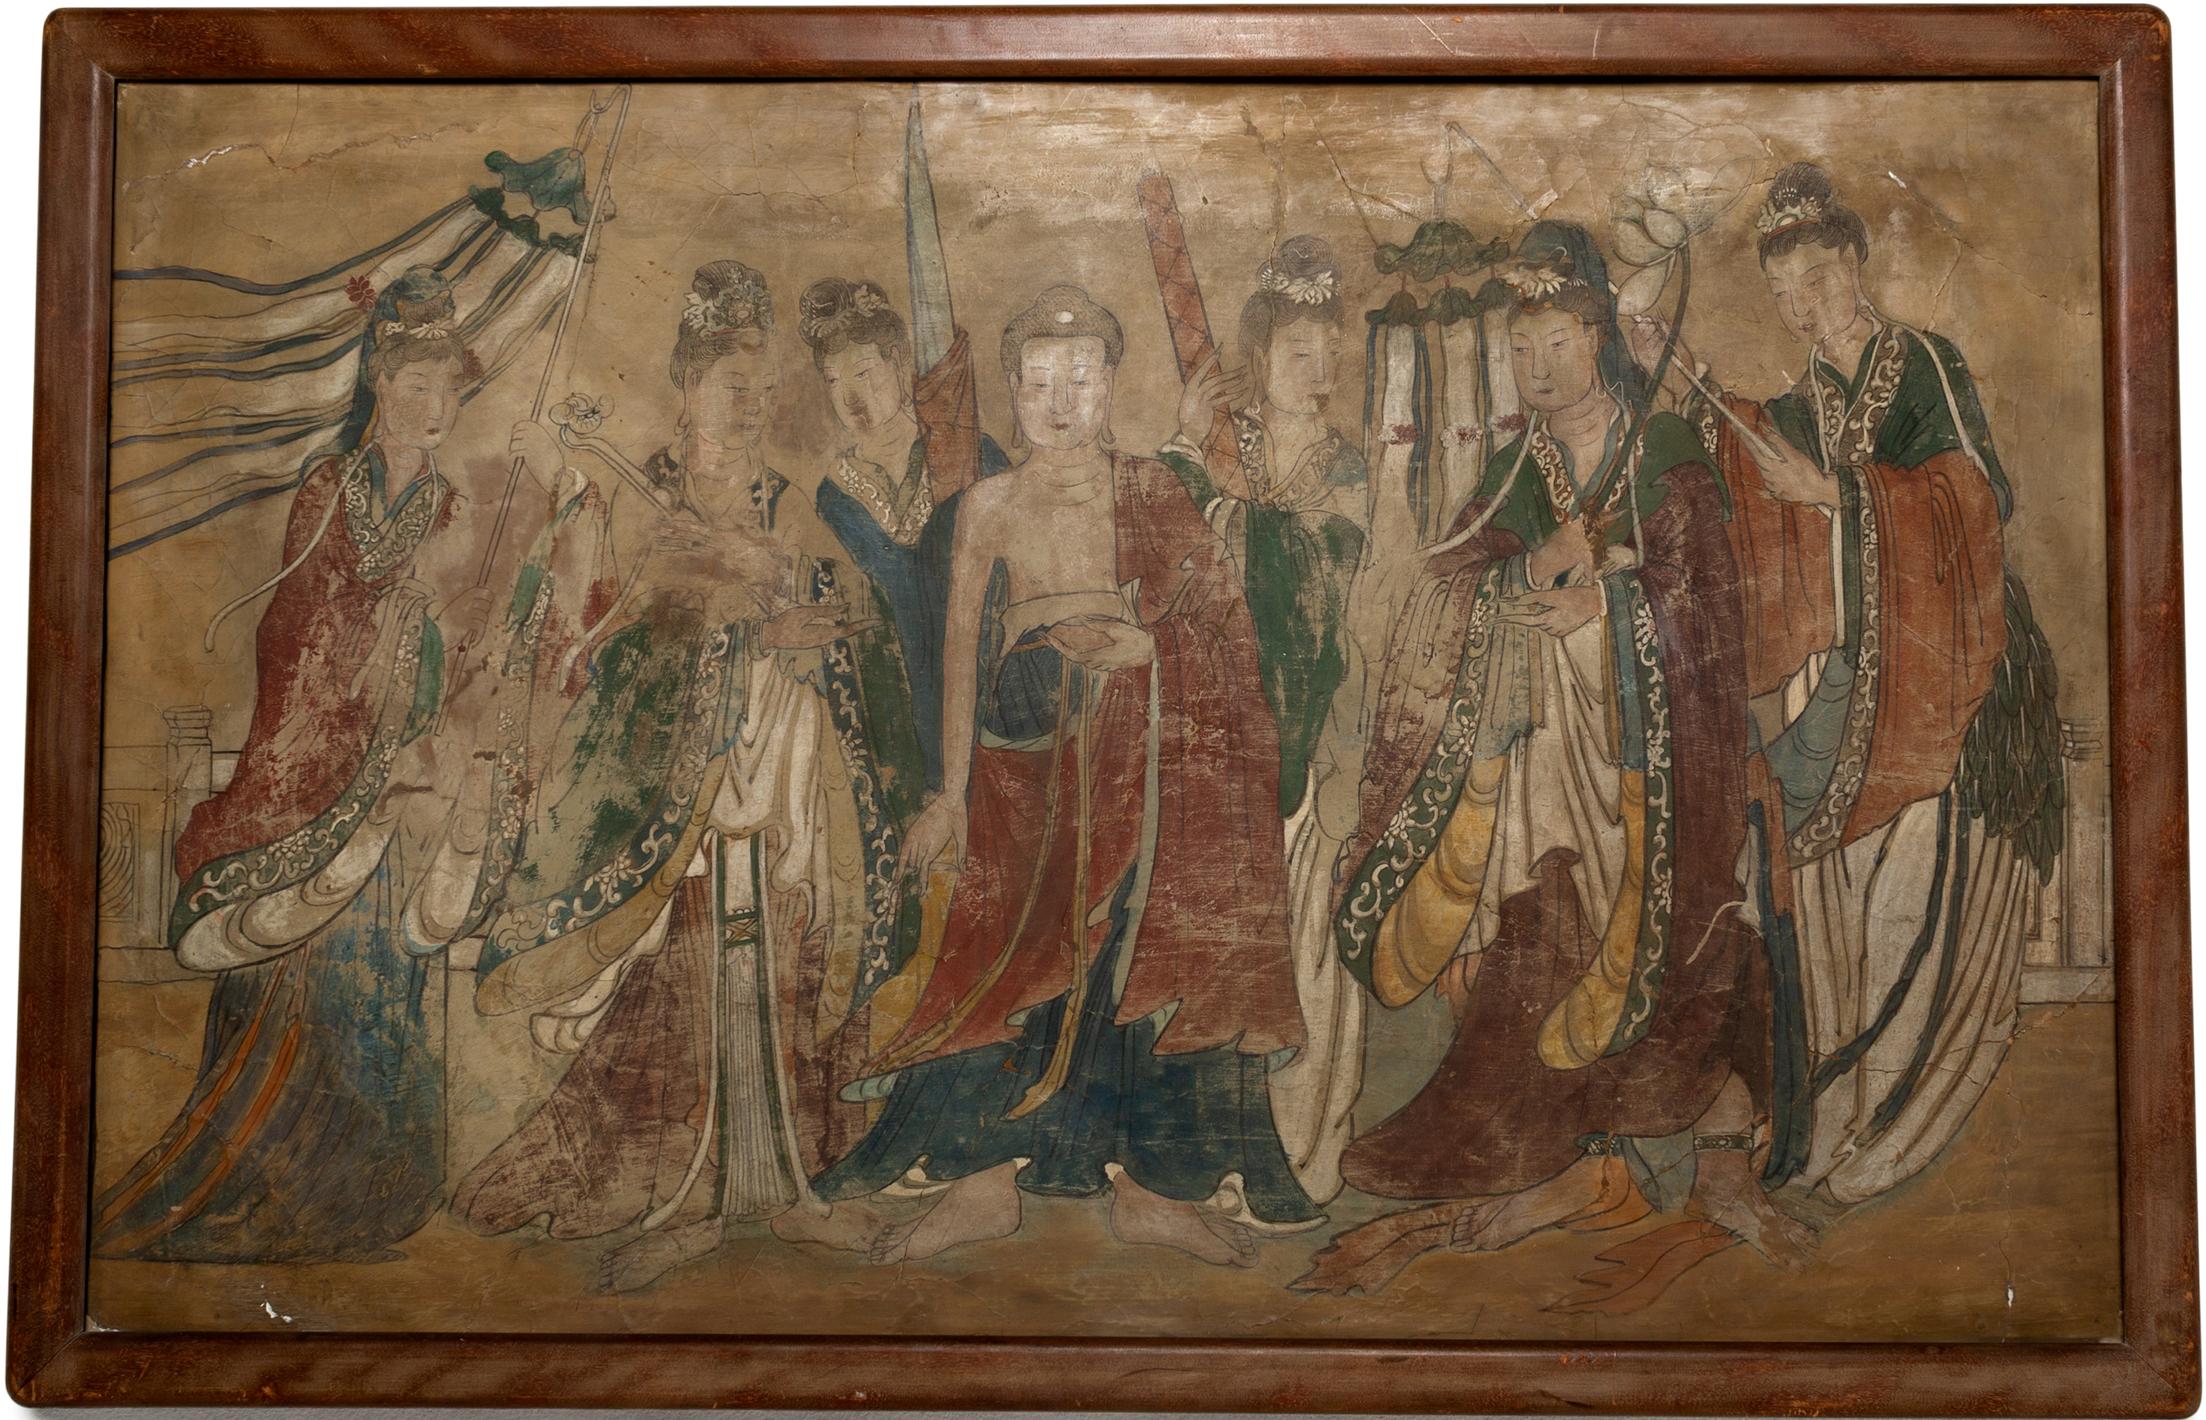 "Buddha Flanked by Female Attendants, " Gouache on Wood Panel, c. 1600